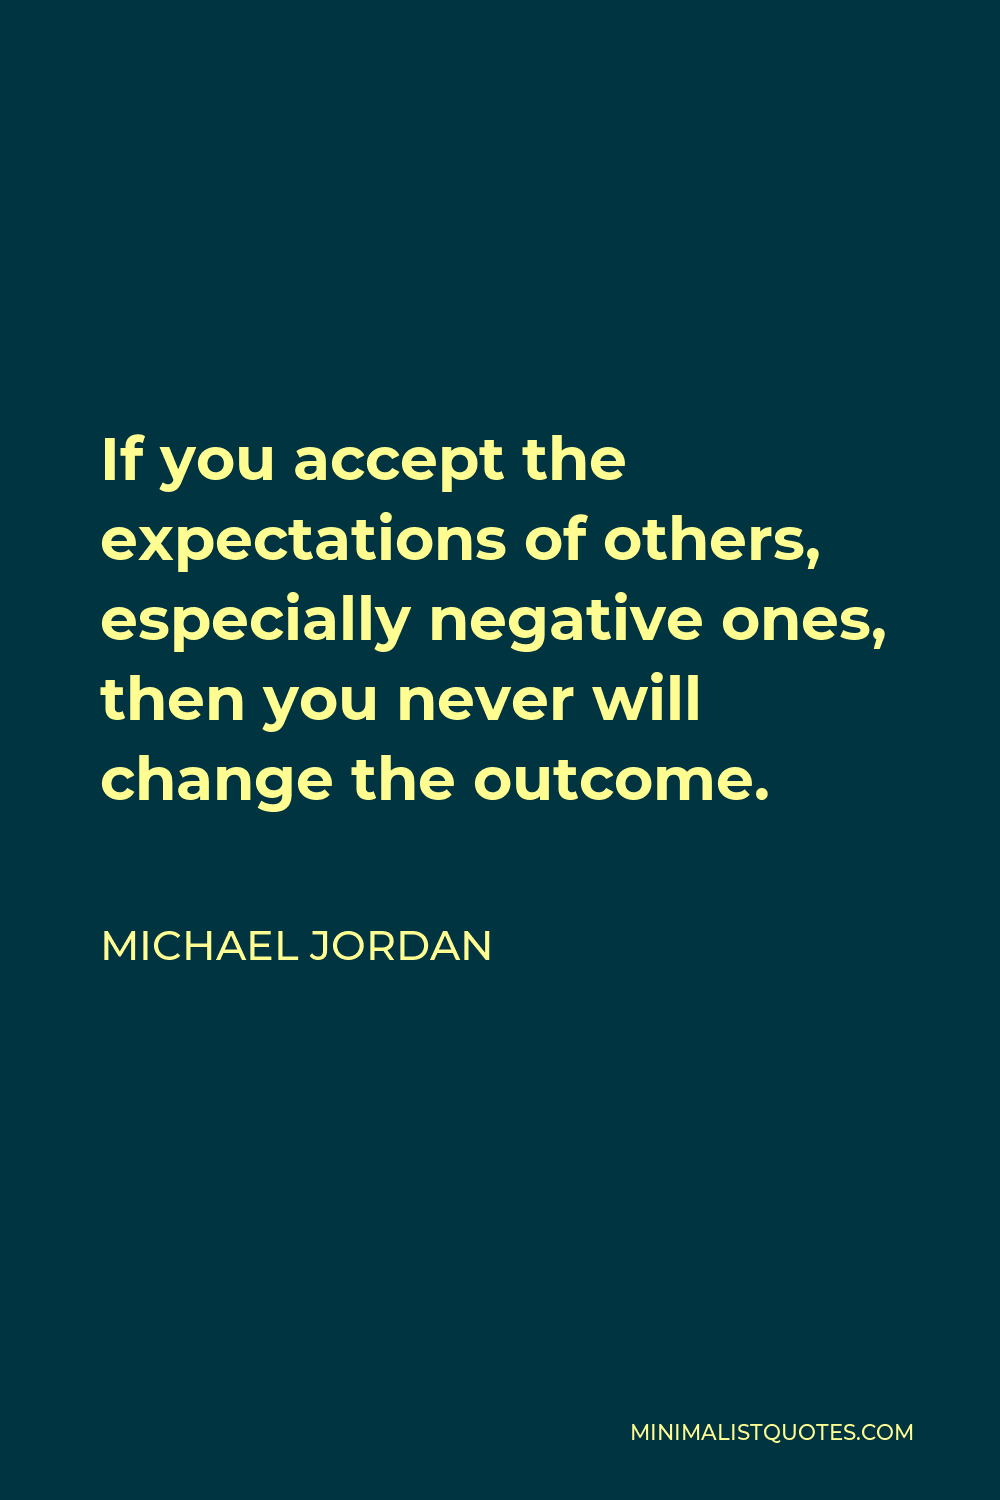 Michael Jordan Quote - If you accept the expectations of others, especially negative ones, then you never will change the outcome.